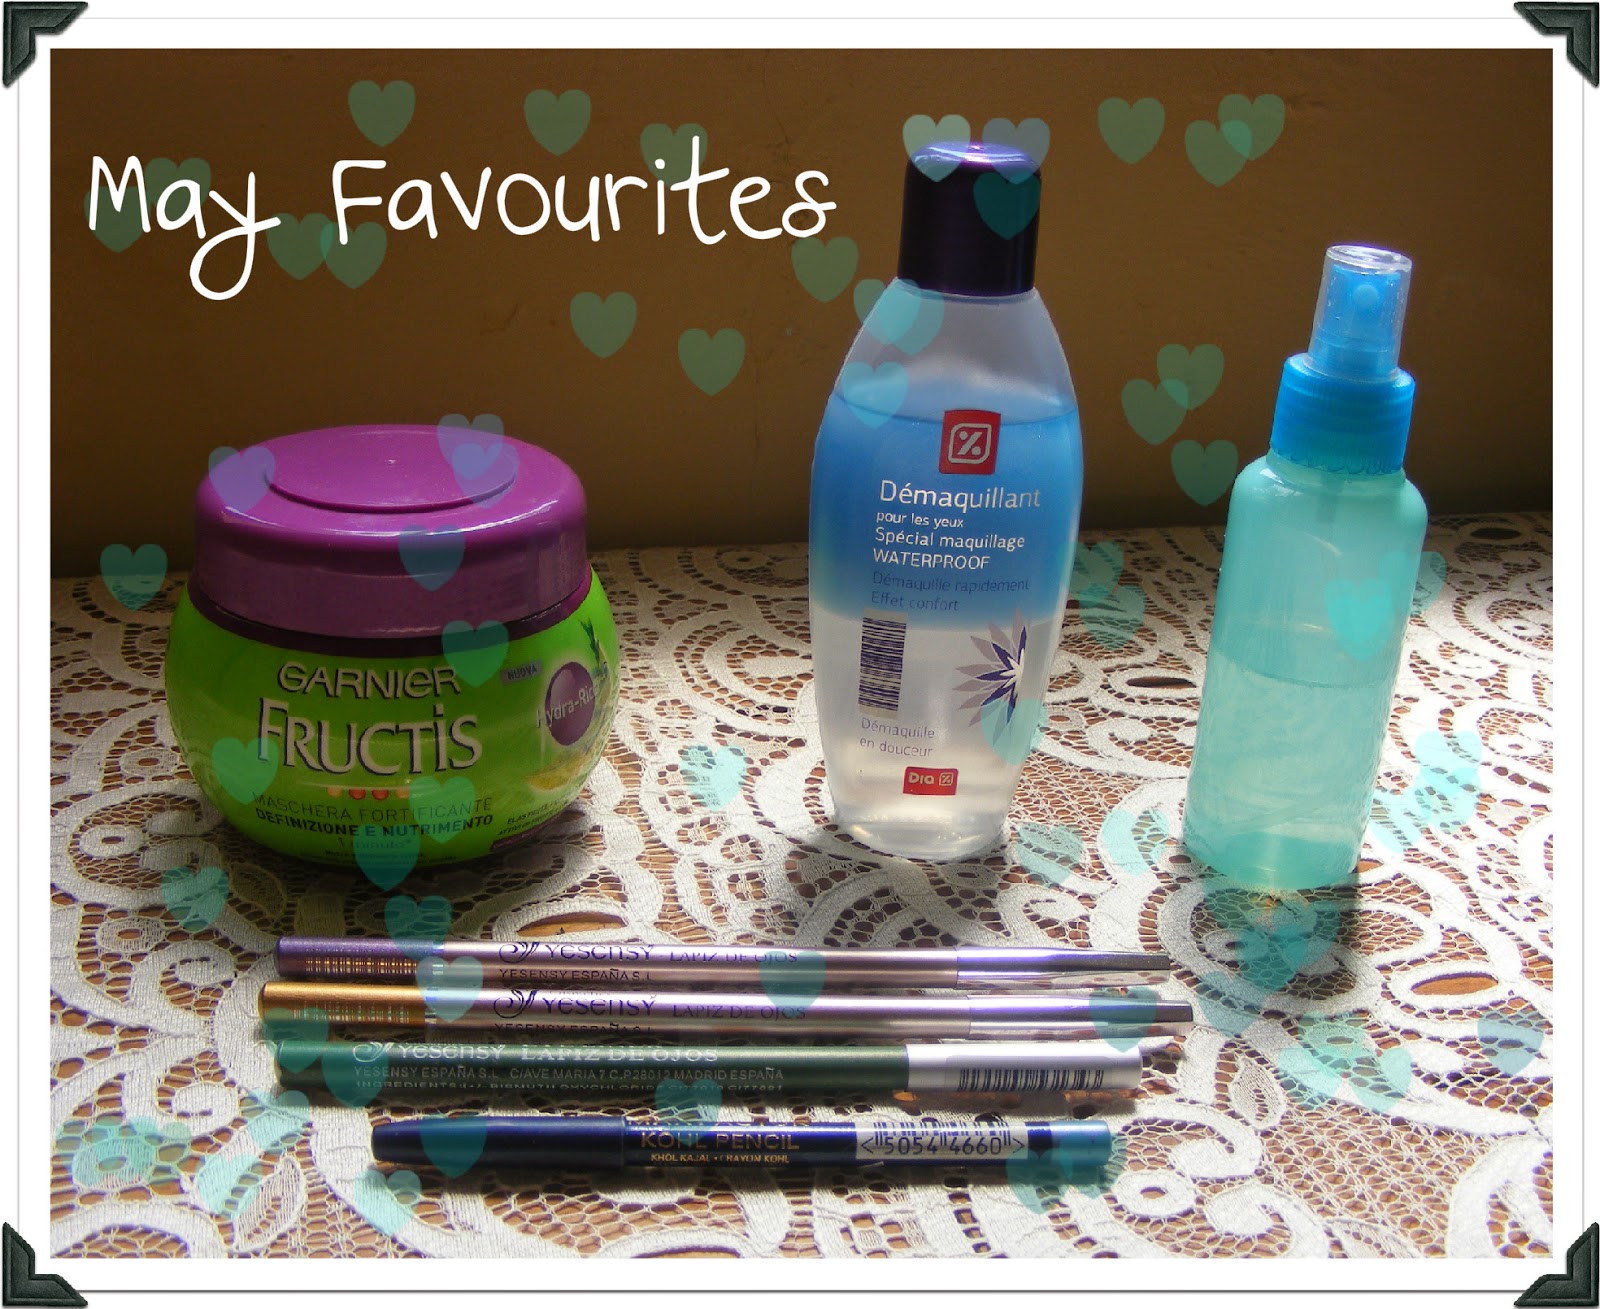 May favourites